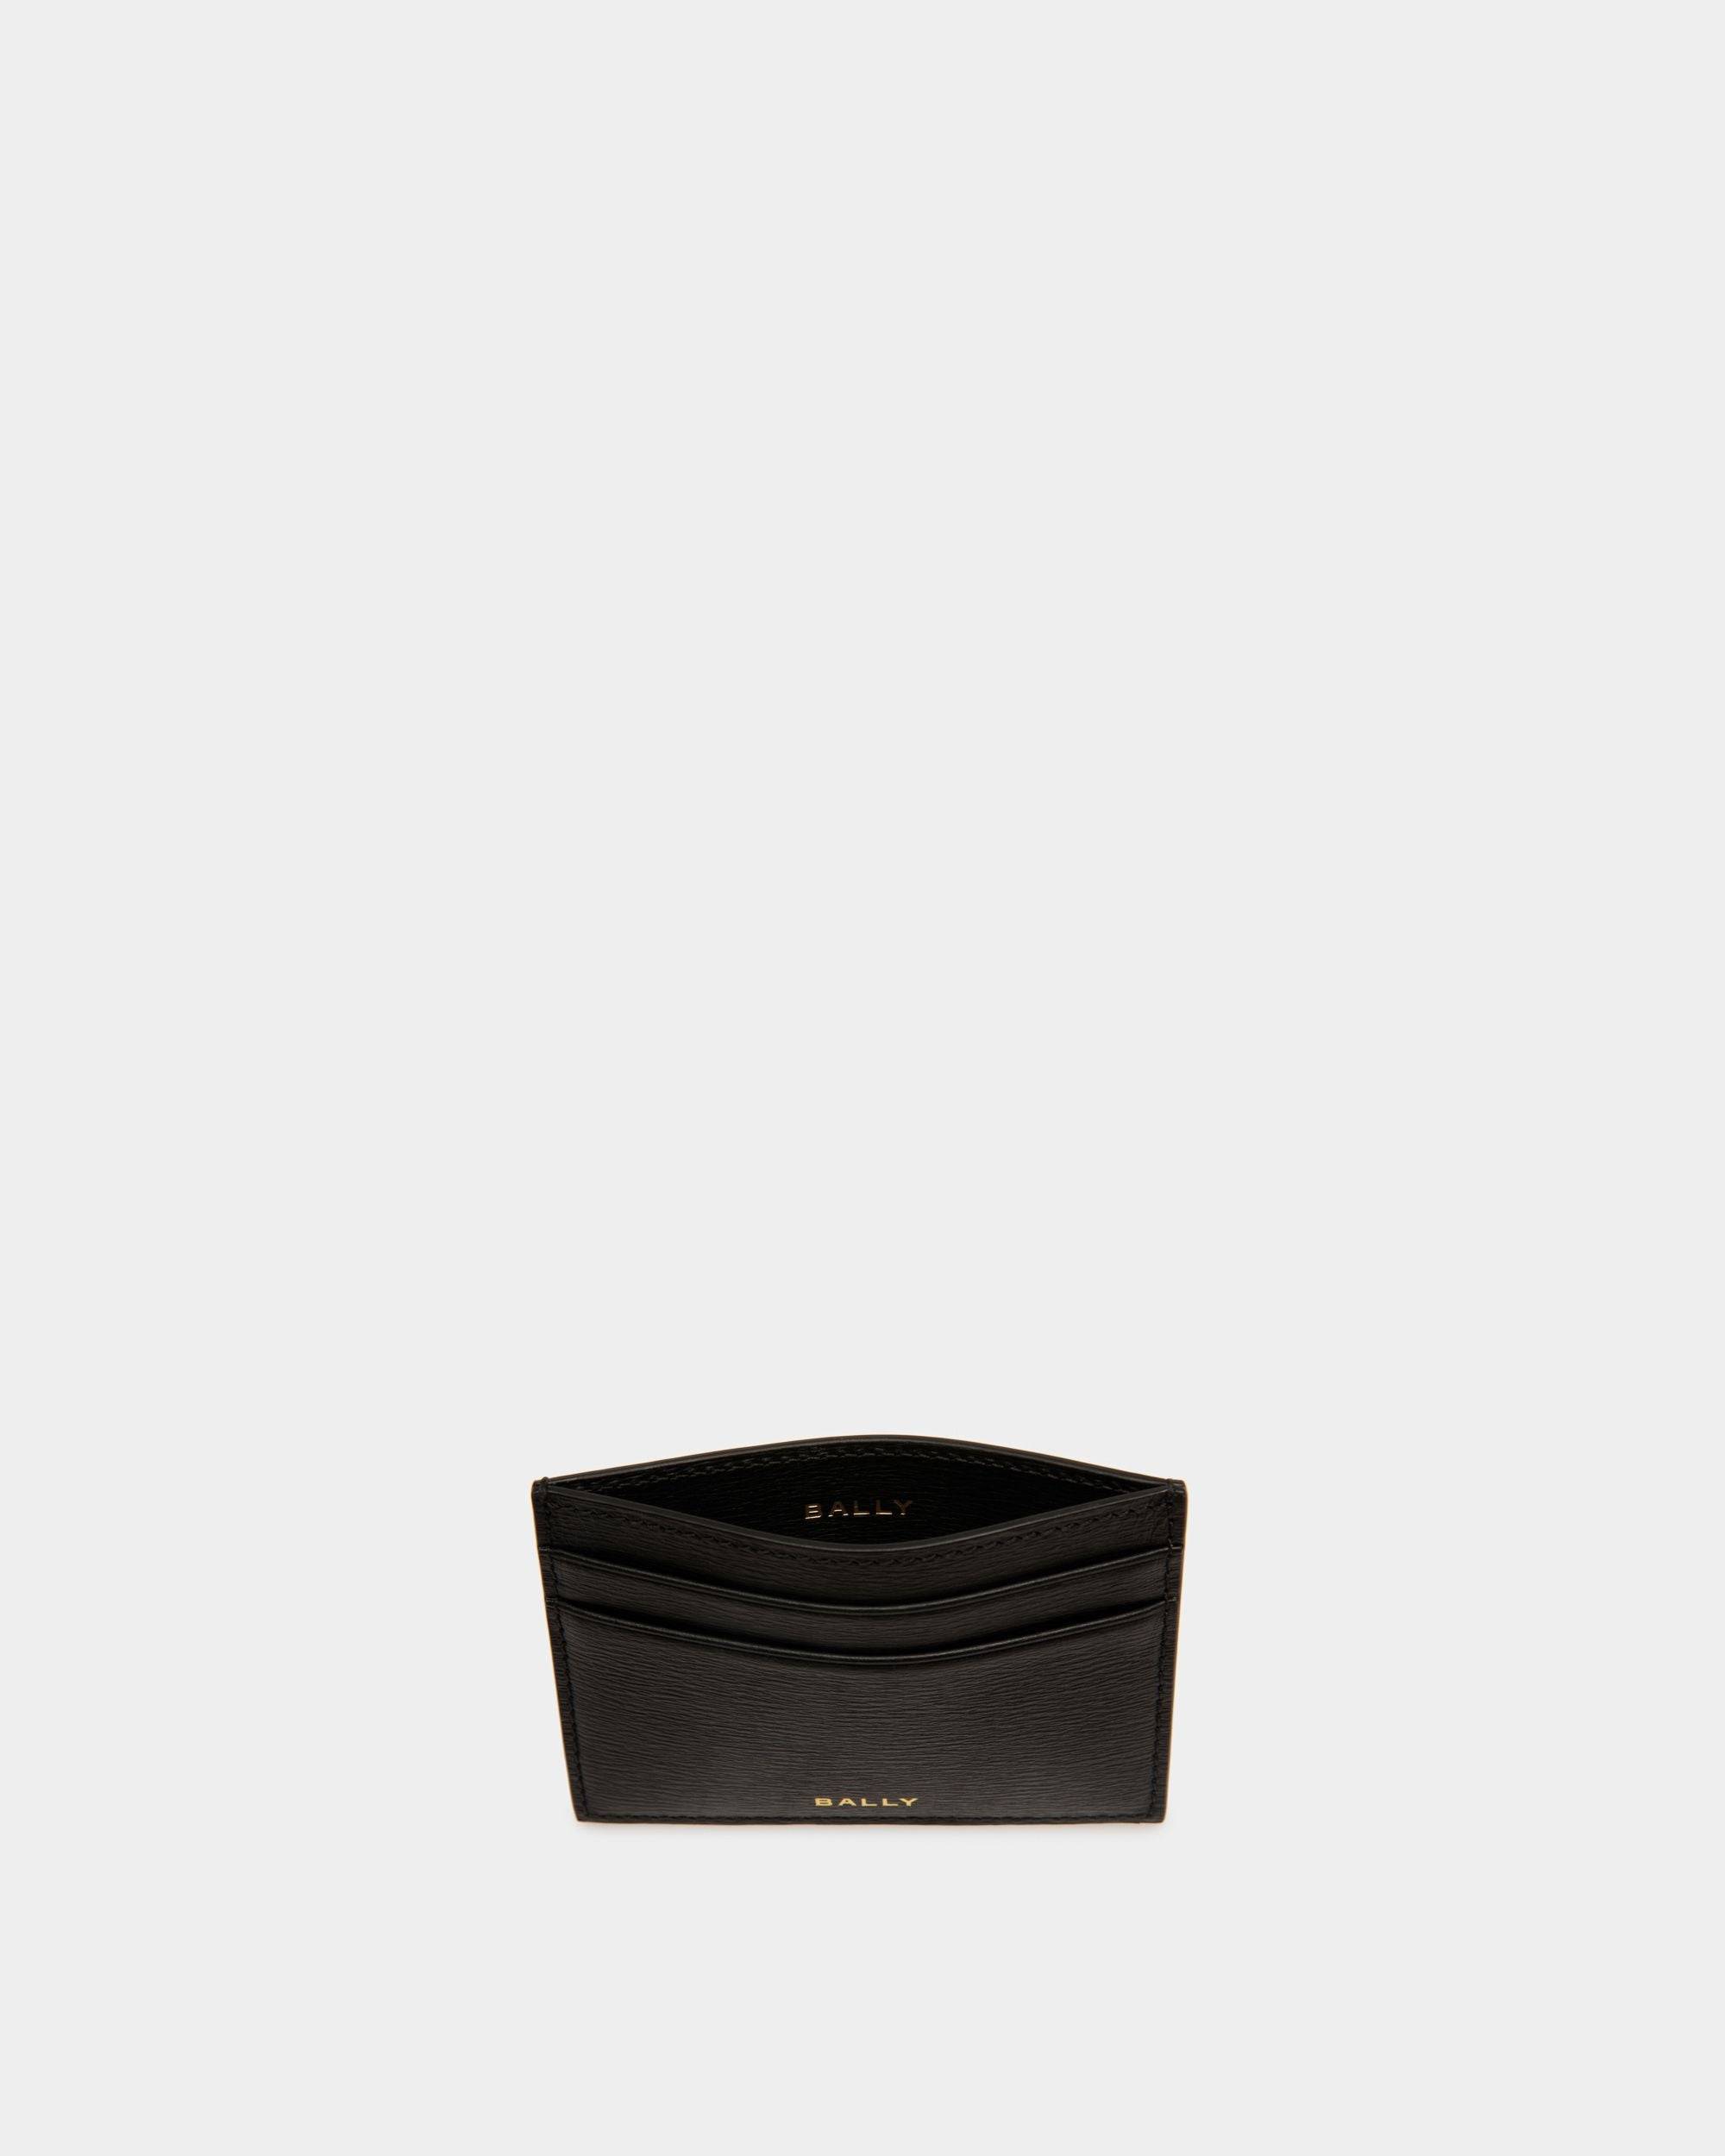 Cny | Men's Card Holder in Black And Red Grained Leather | Bally | Still Life Open / Inside